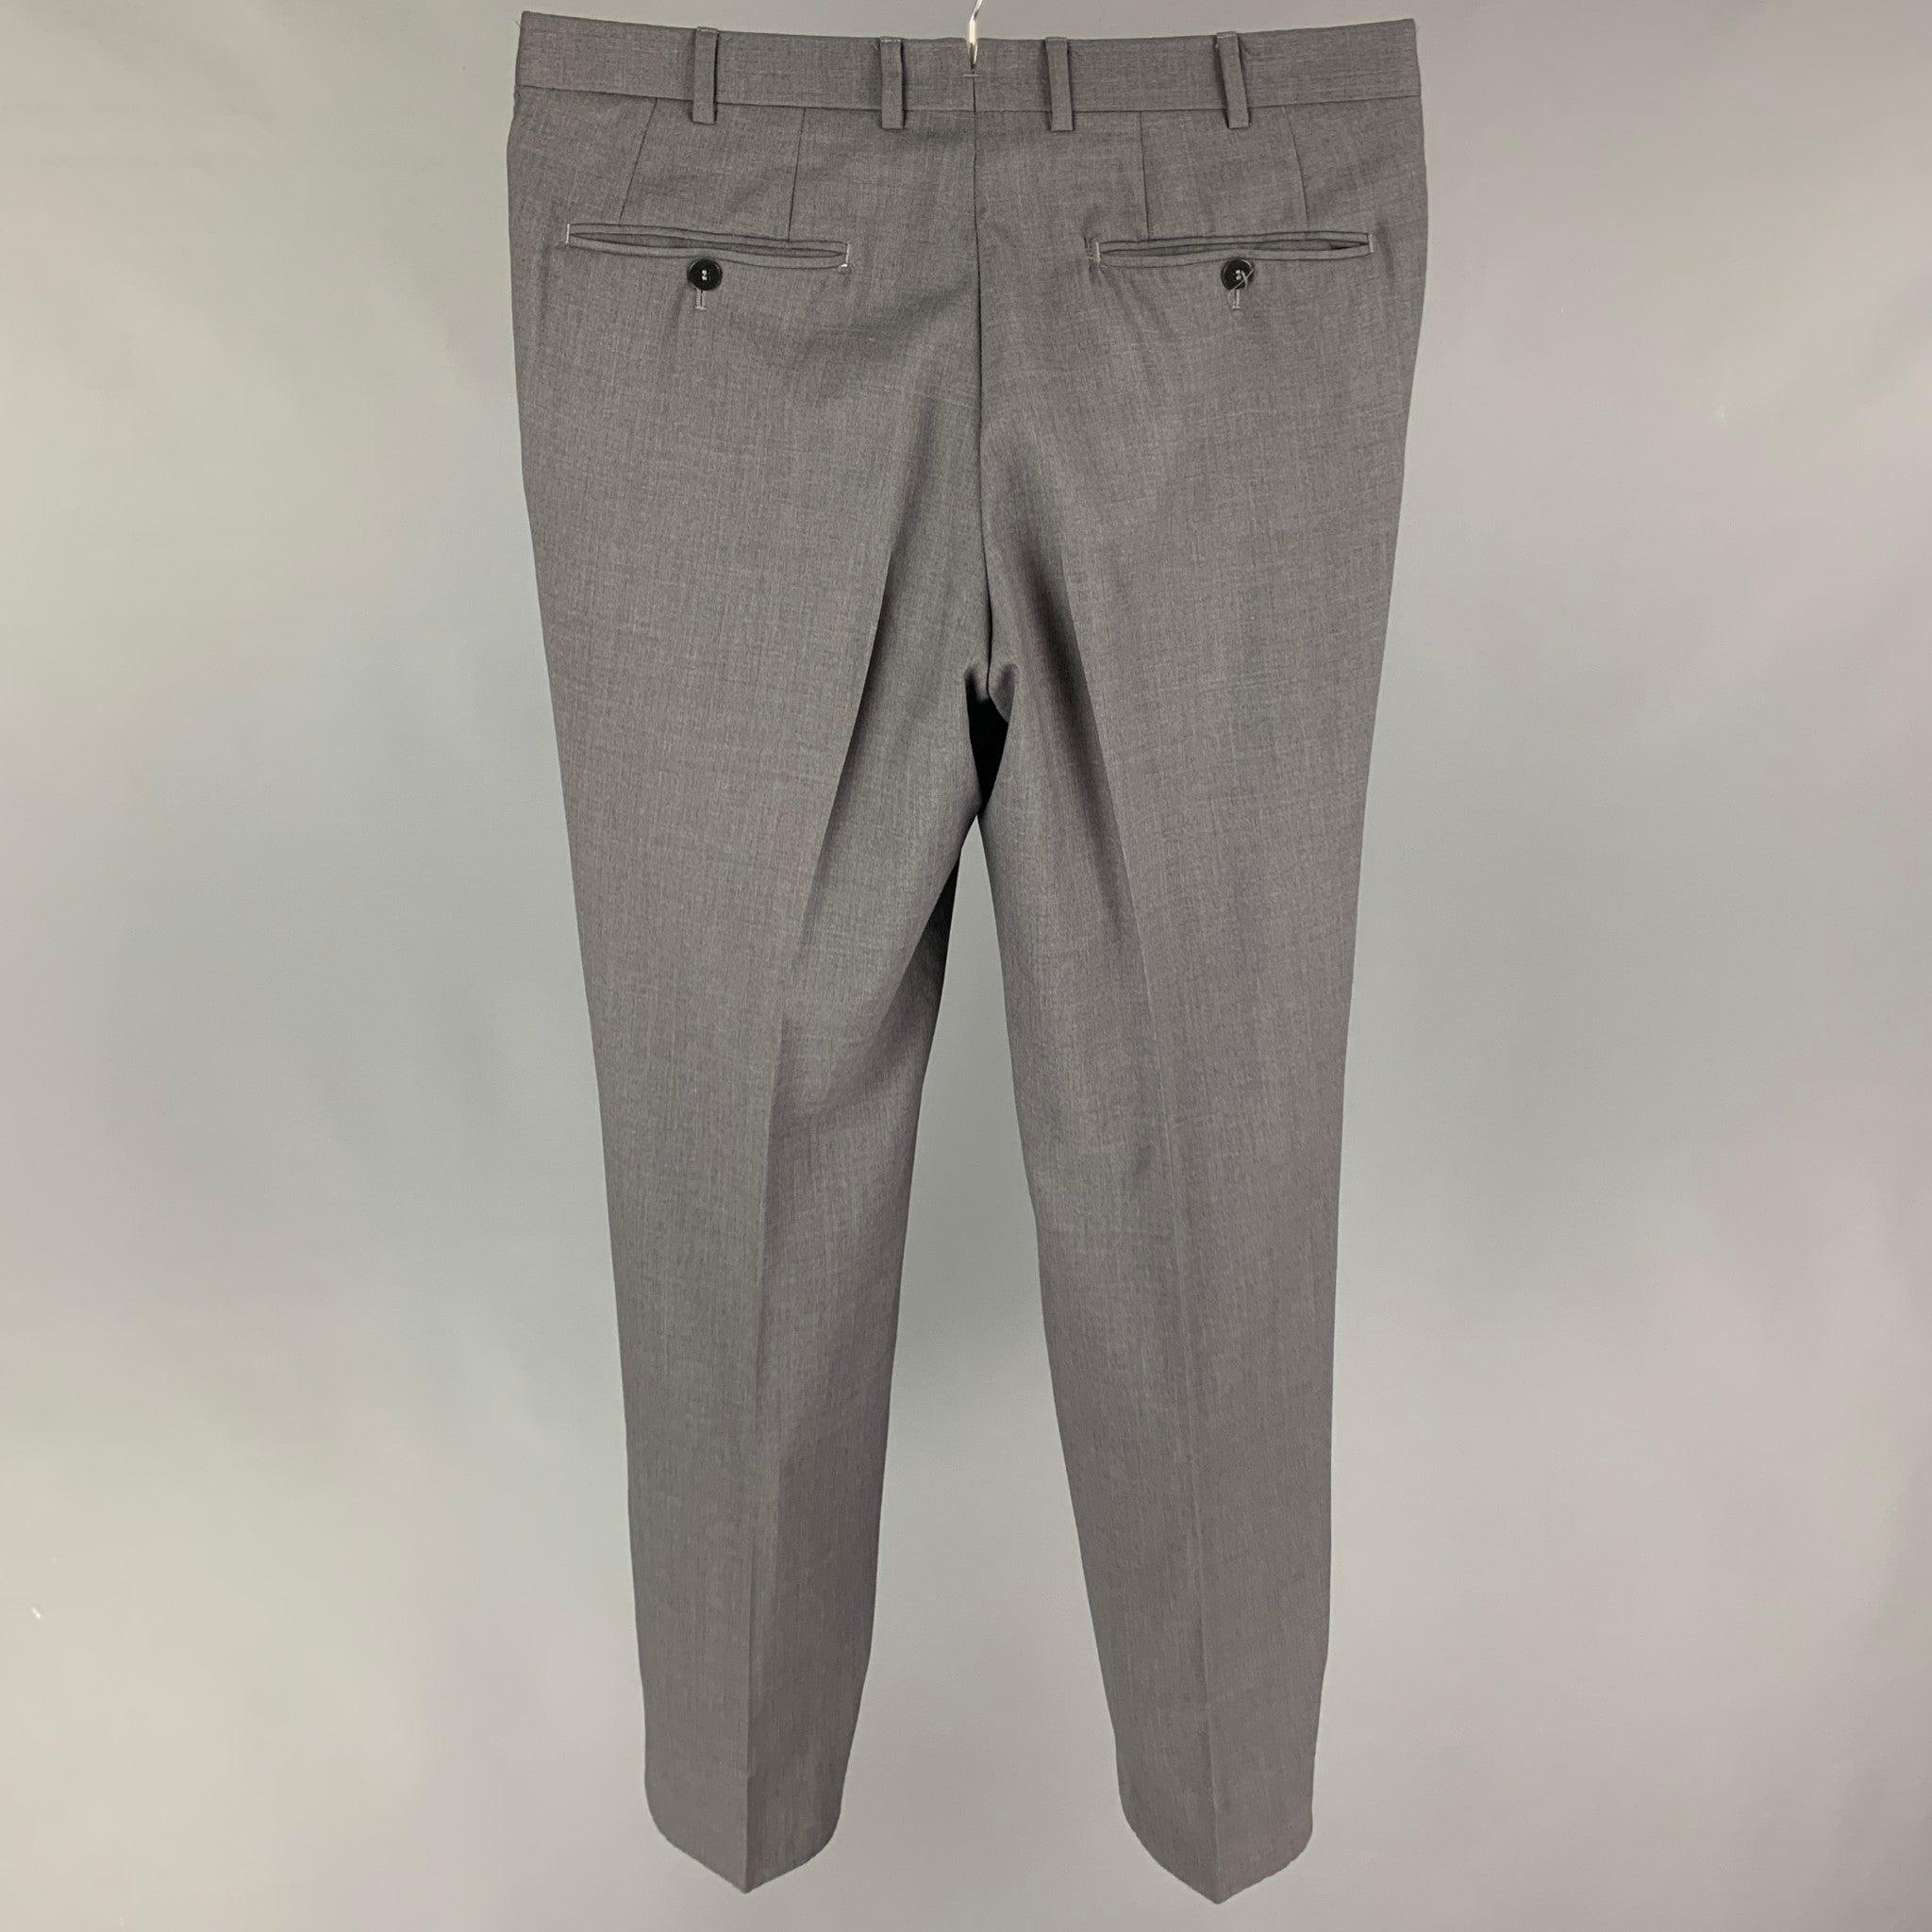 ISAIA dress pants comes in a gray lana wool featuring a flat front and a zip fly closure. Made in Italy.
Very Good
Pre-Owned Condition. 

Marked:   48 

Measurements: 
  Waist: 32 inches  Rise: 10 inches  Inseam: 31 inches 
  
  
 
Reference: